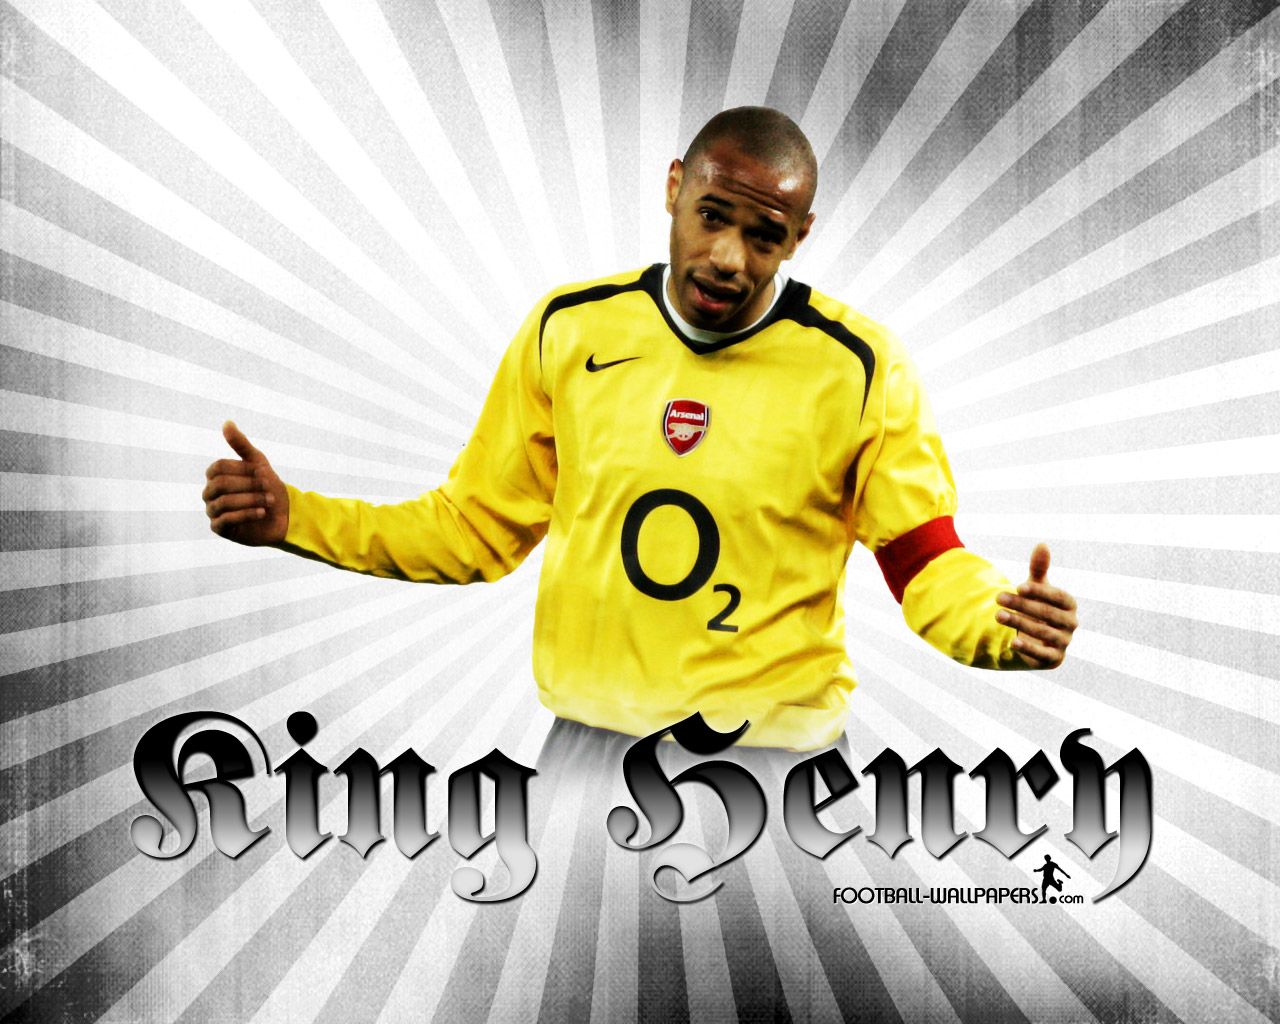 Thierry Henry Wallpaper #1 | Football Wallpapers and Videos